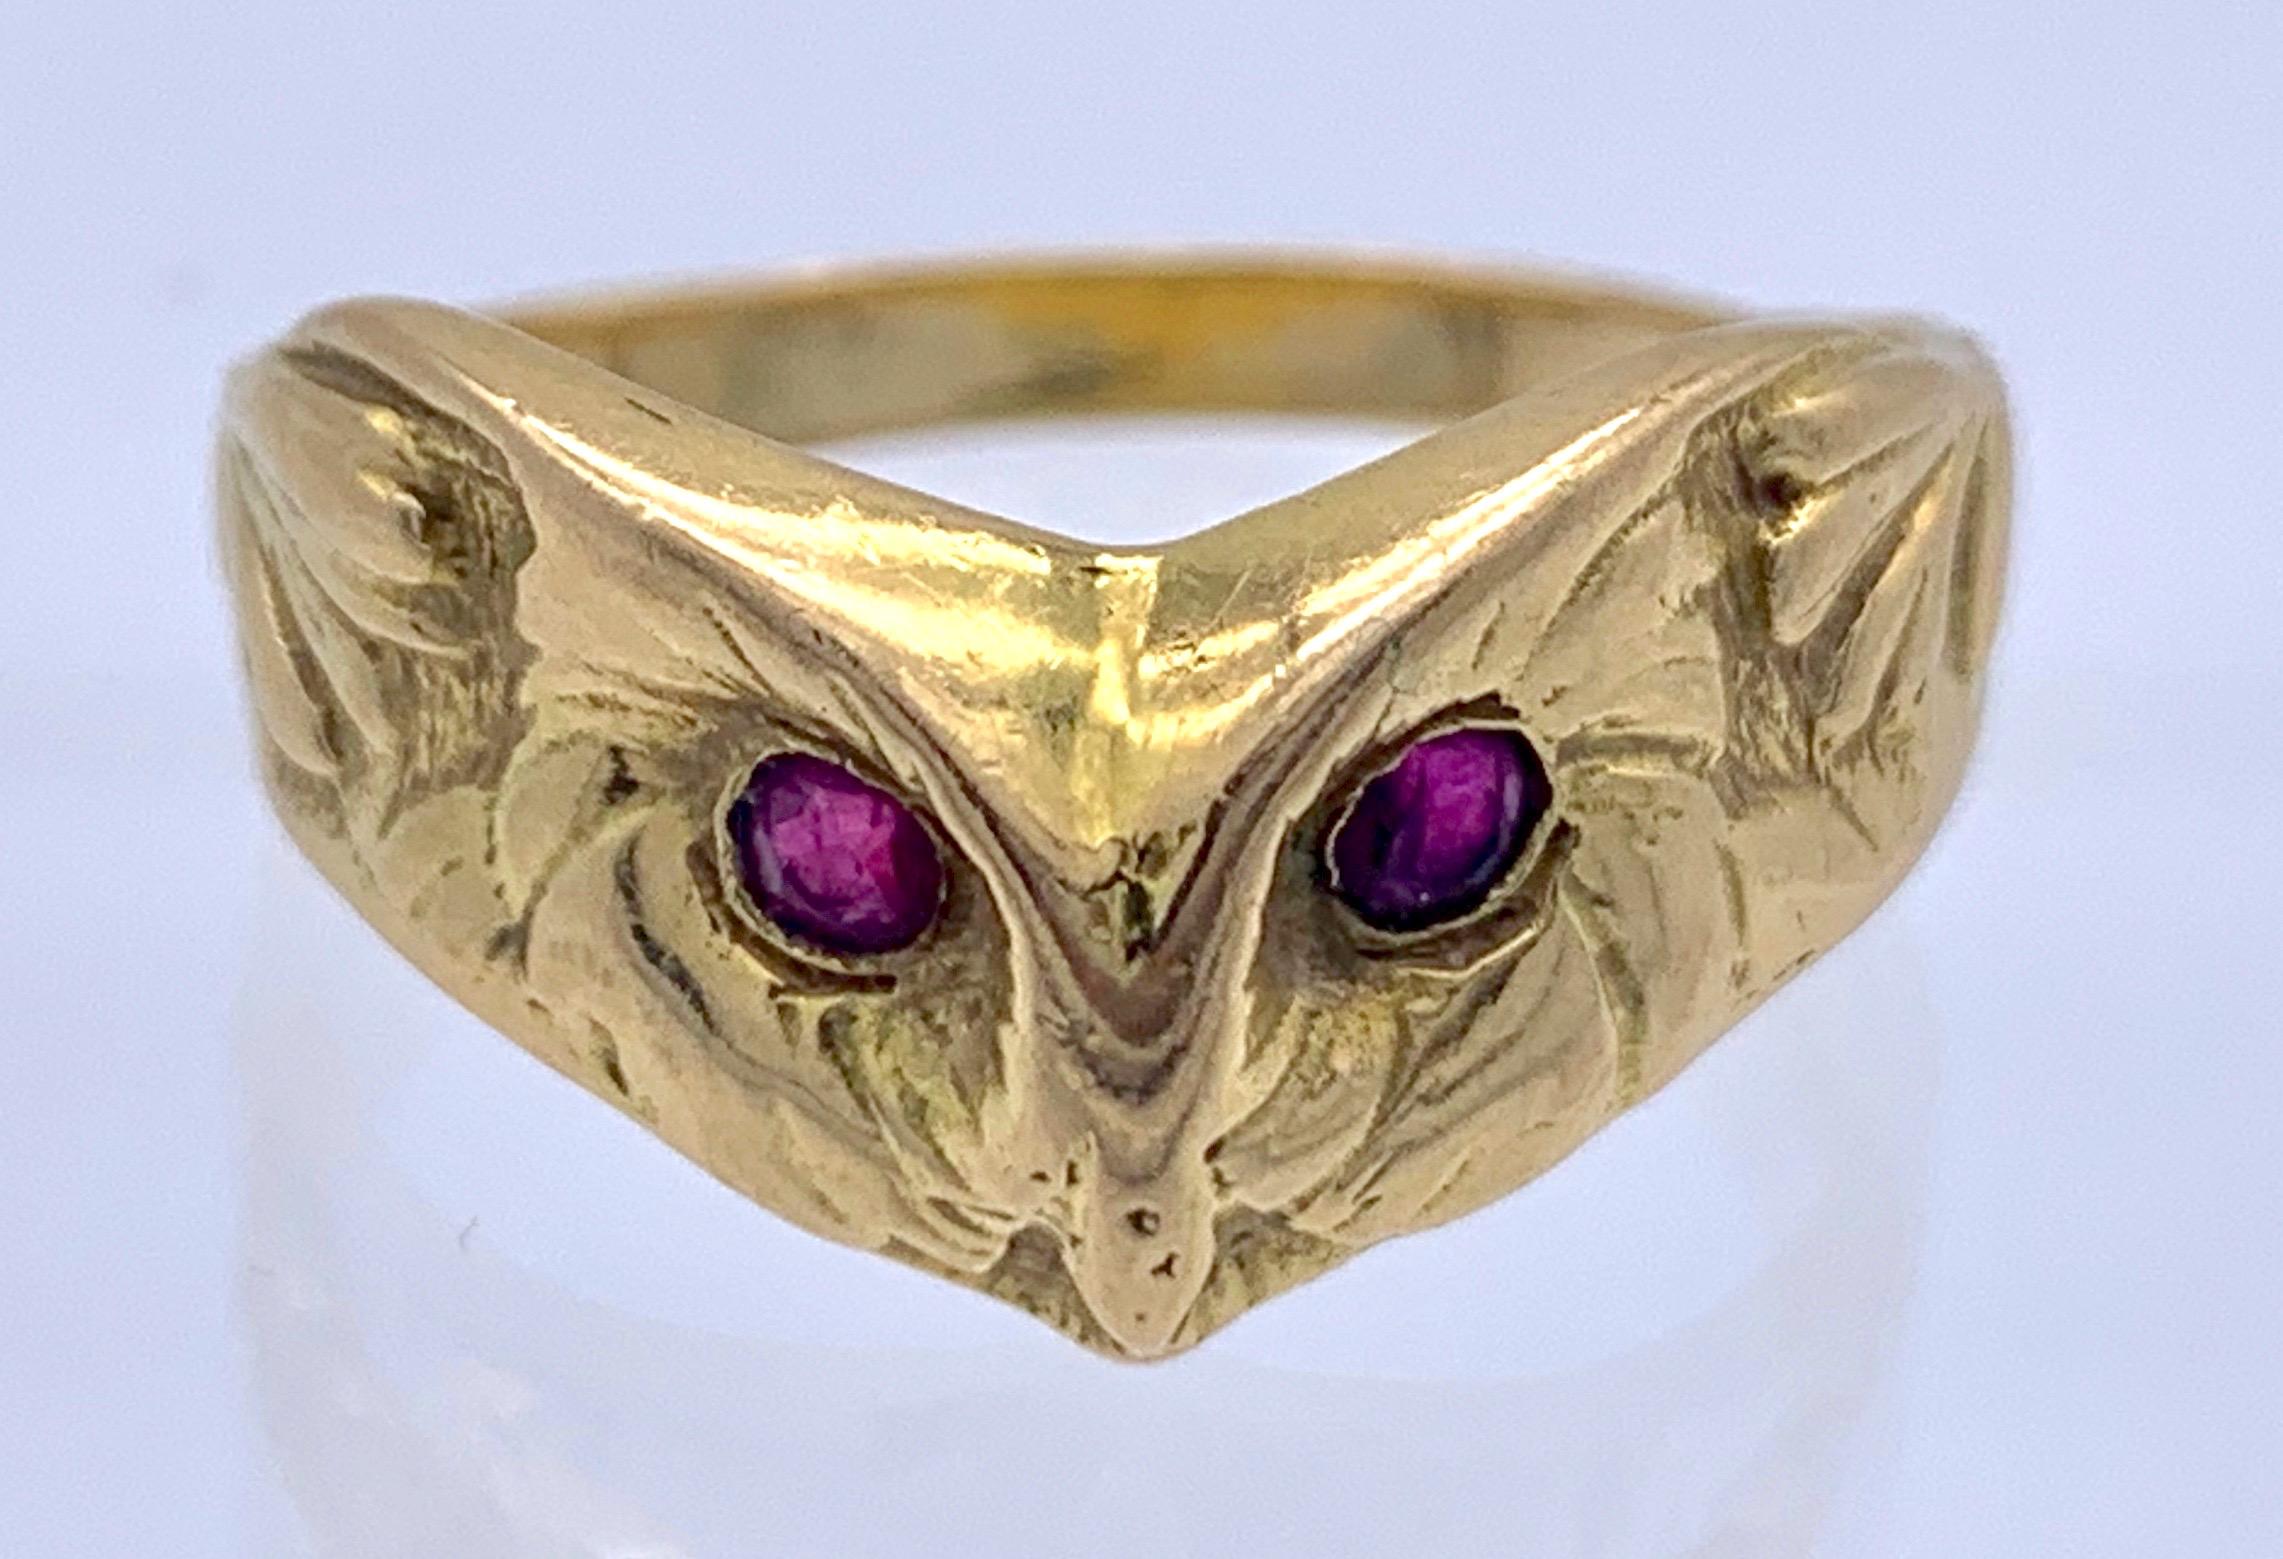 This elegant 18k yellow gold Art Nouveau ring features an expressive, finely chiselled owl with ruby set eyes.
The owl symbolizes wisdom, but it was also the symbol of the Greek goddess Athena.

Ring size US  8,5
                EU 58,5